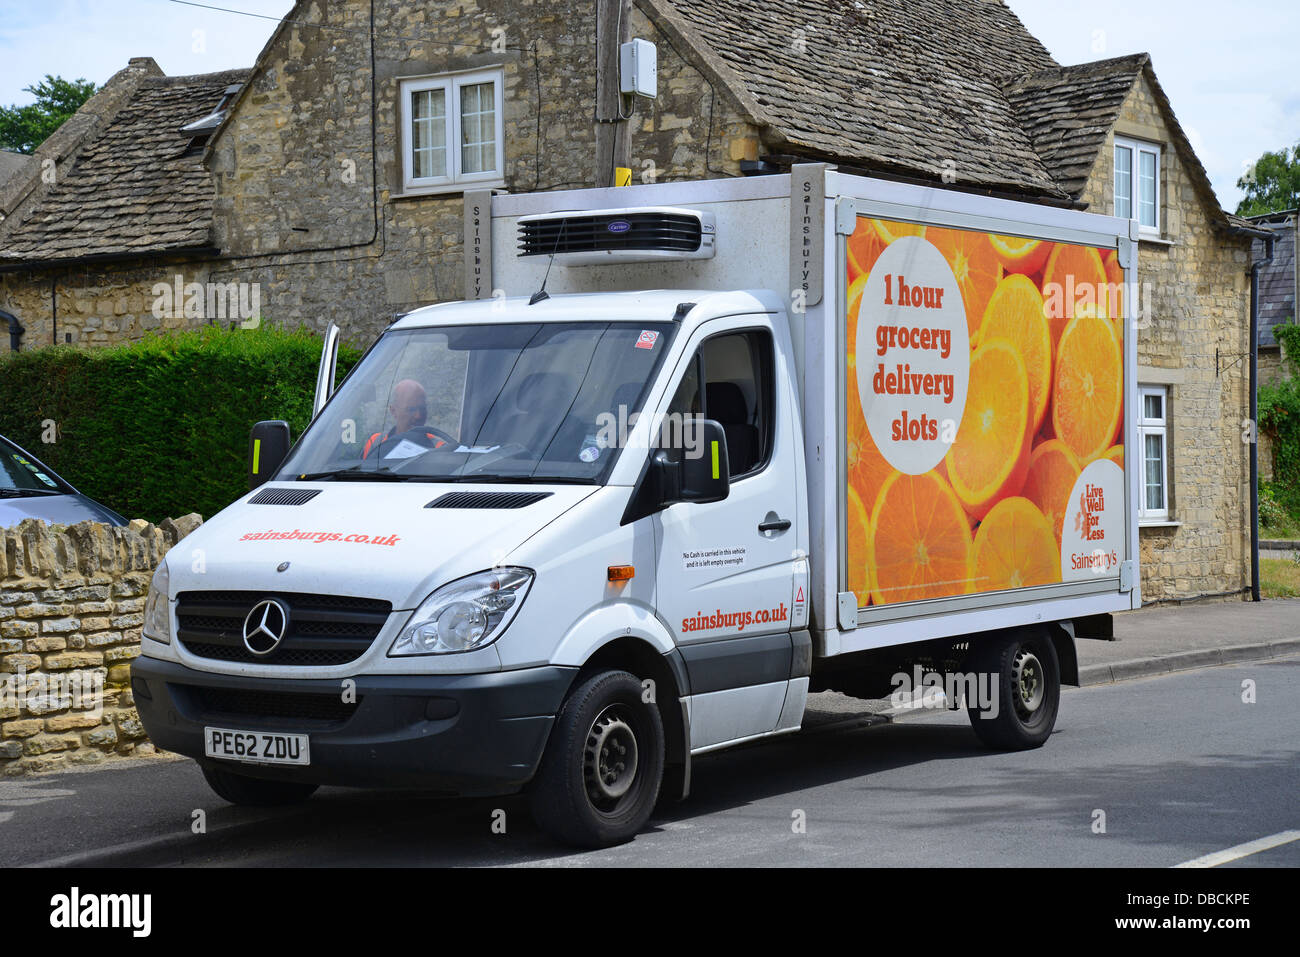 Sainsbury's delivery van, High Street, Northleach (Cotswolds), Gloucestershire, Angleterre, Royaume-Uni Banque D'Images